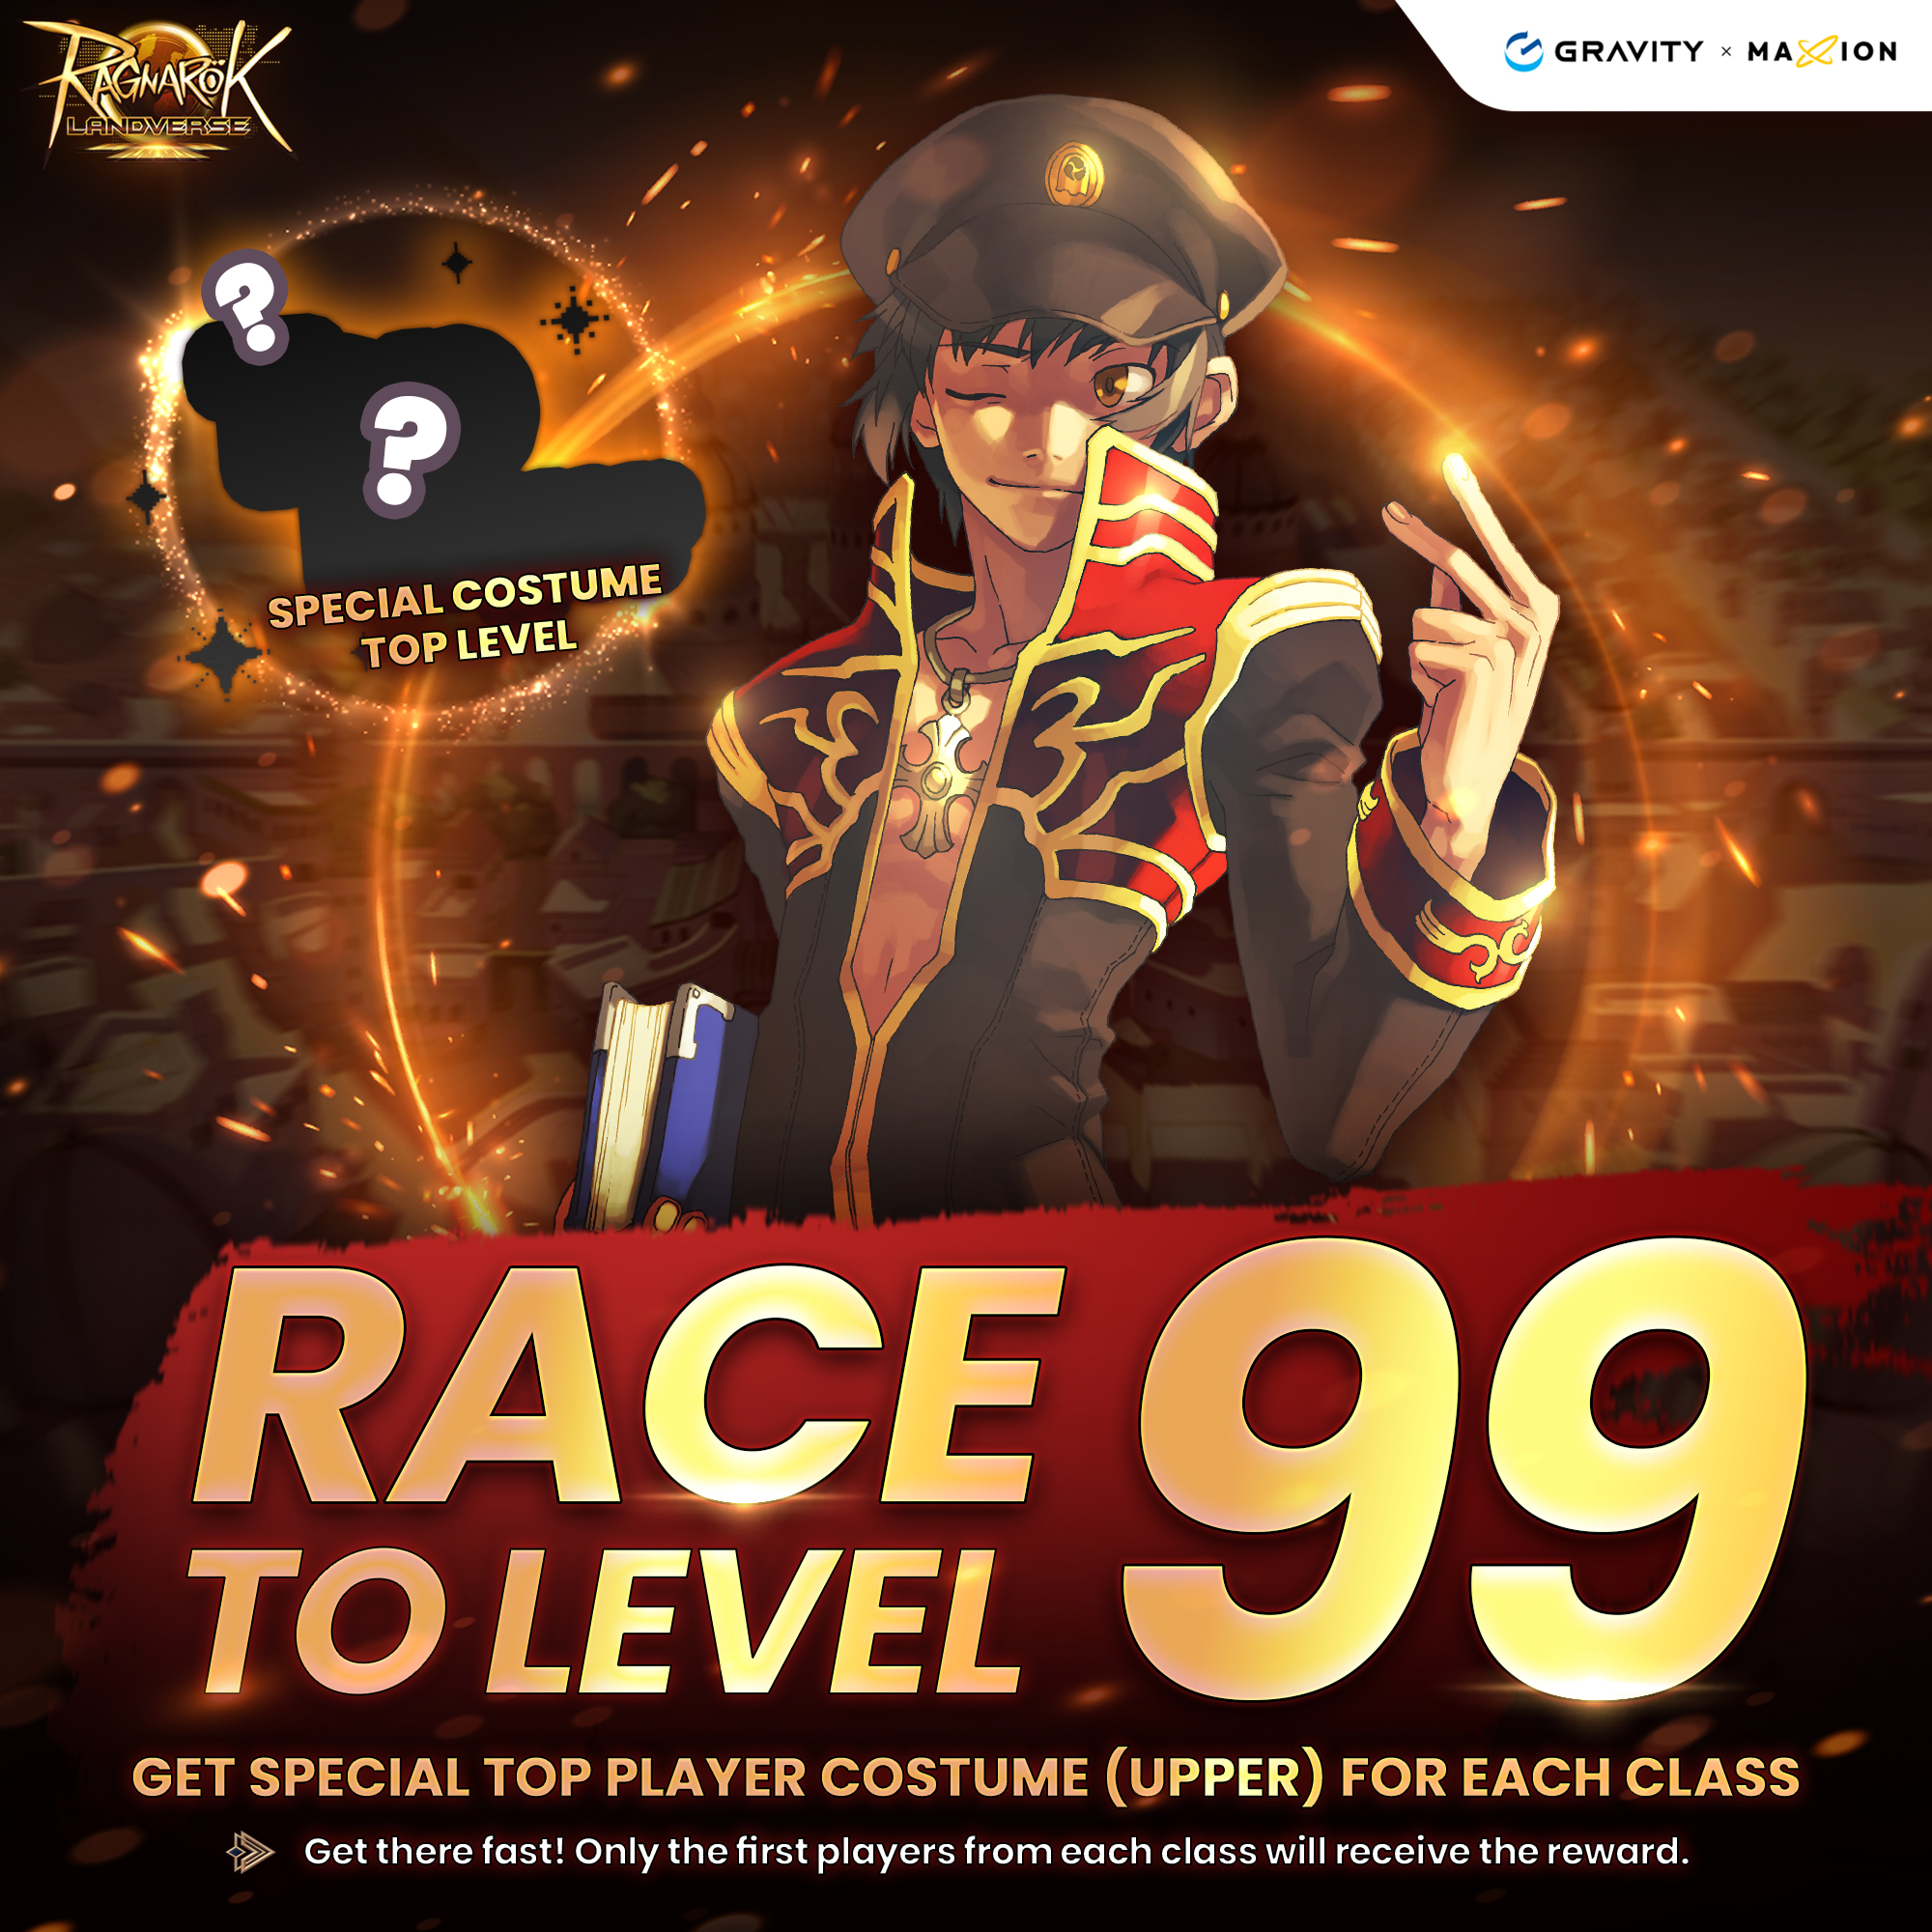 Race to 99 Event! Be among the top players